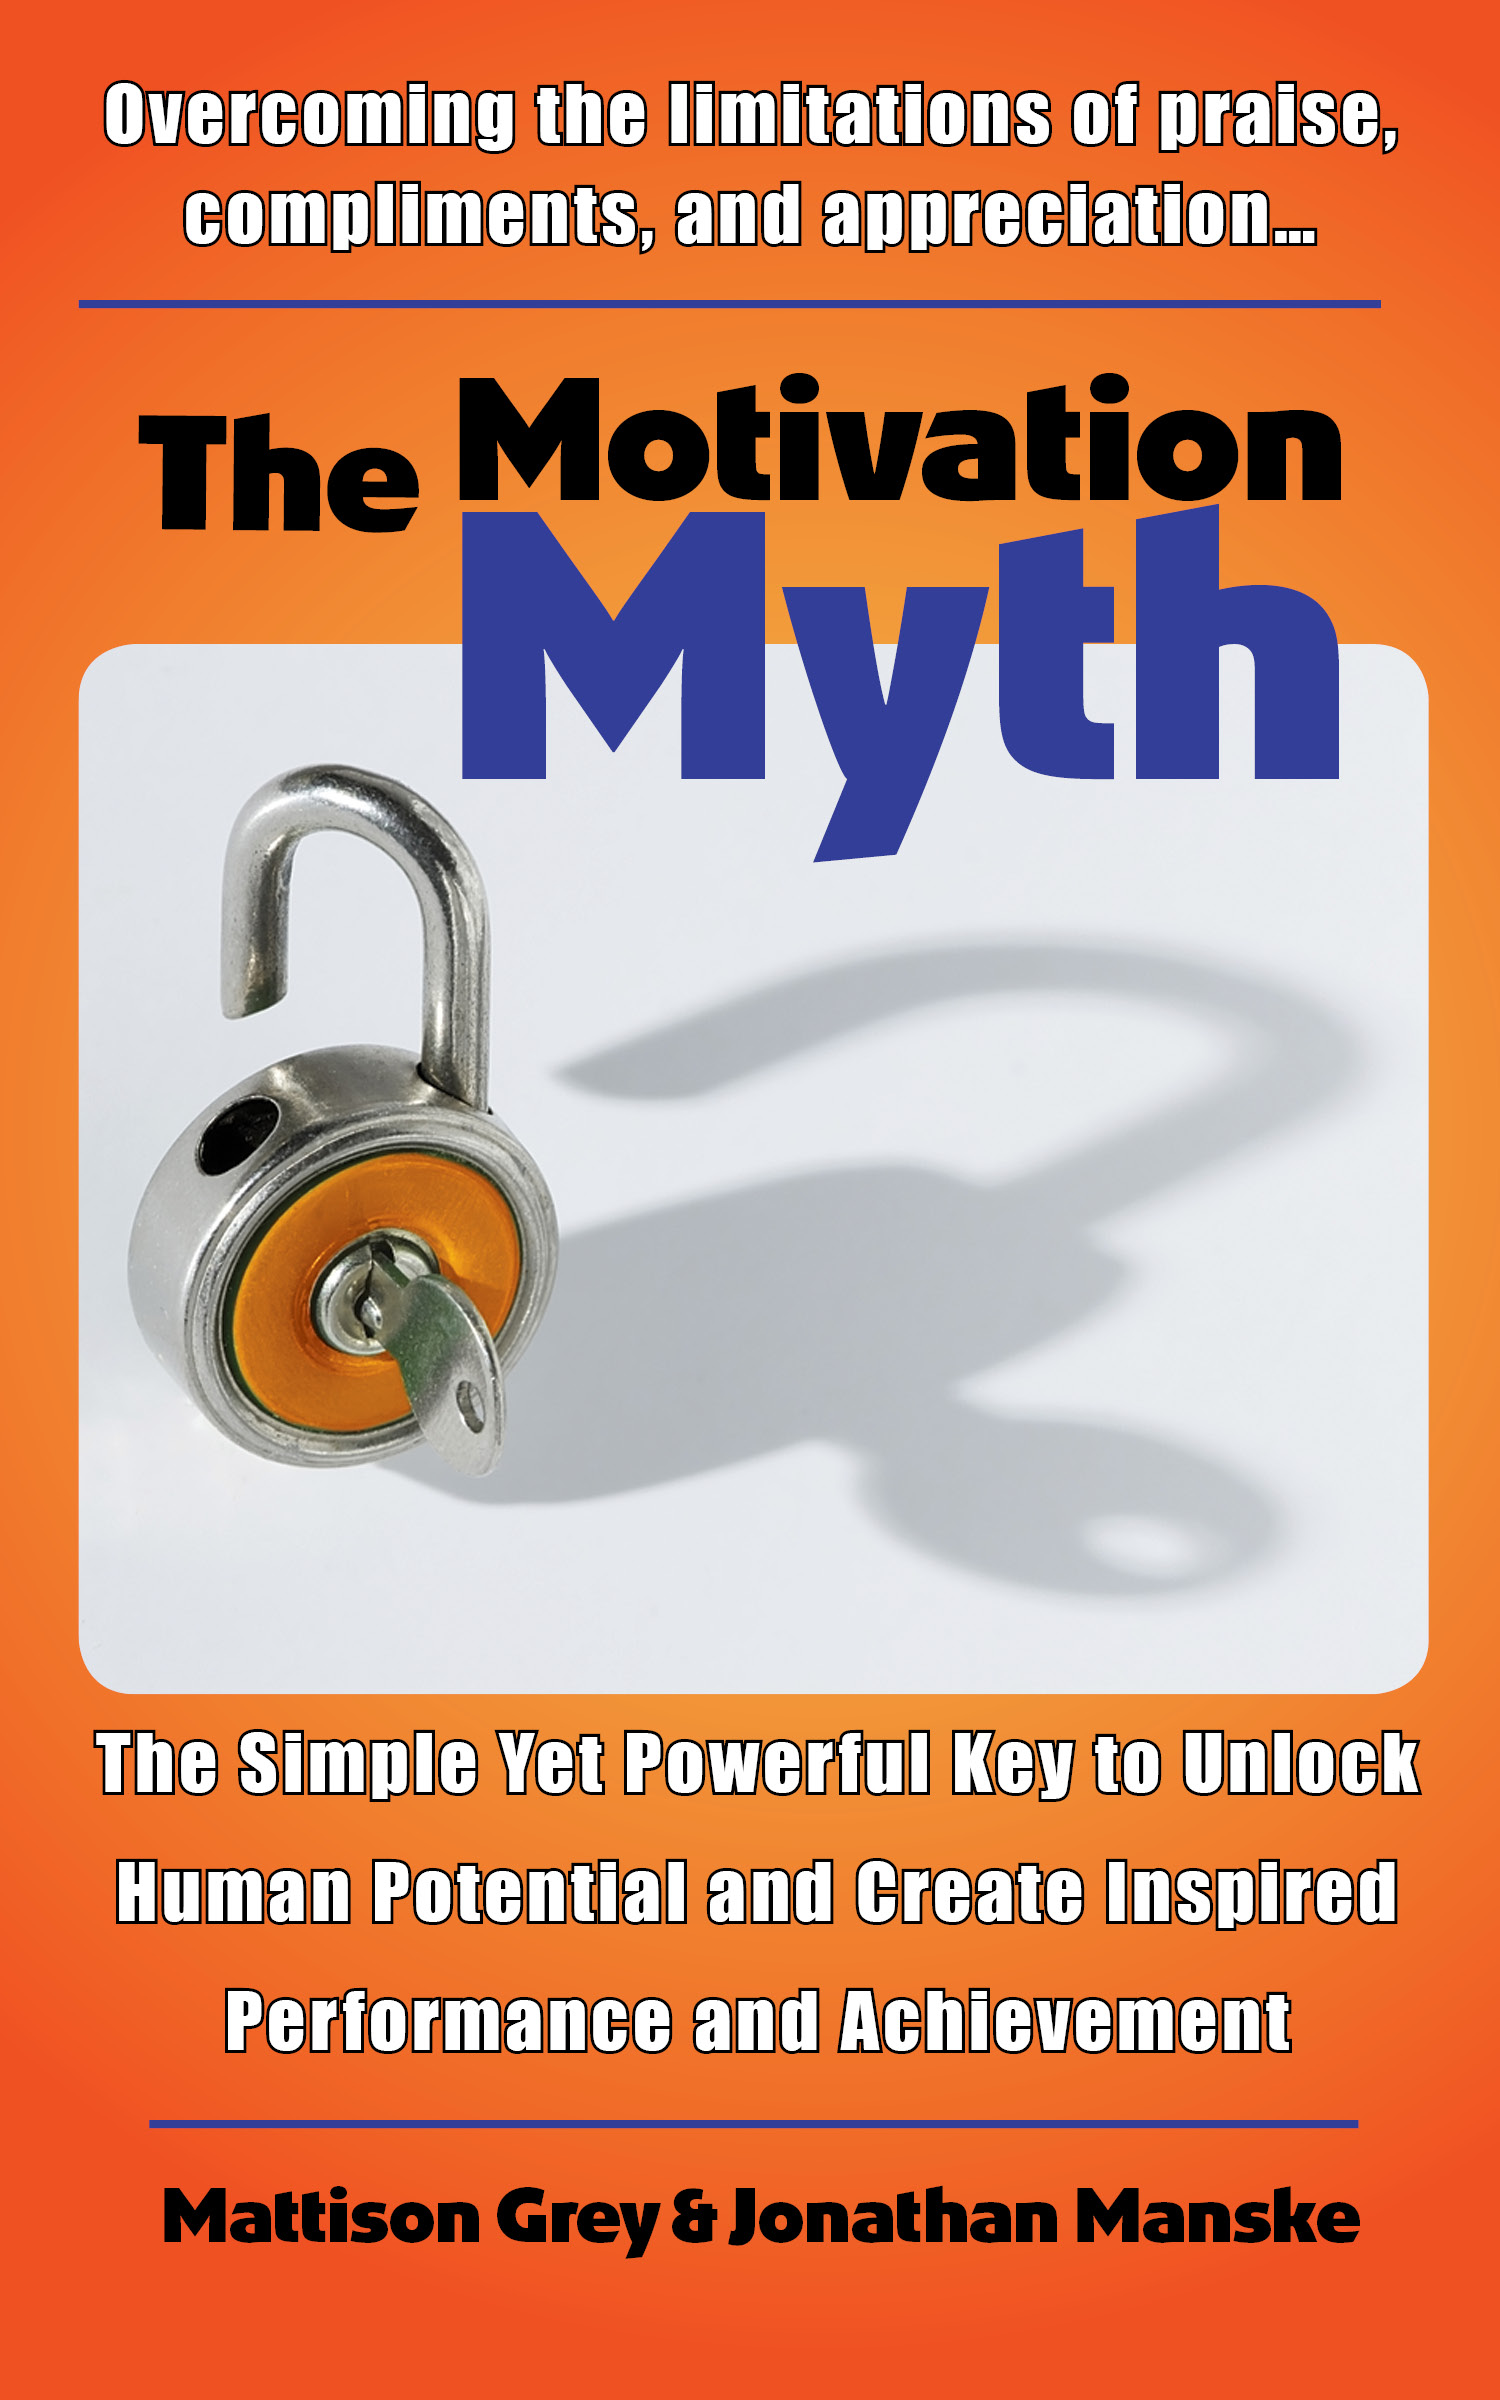 The Motivation Myth (book cover)